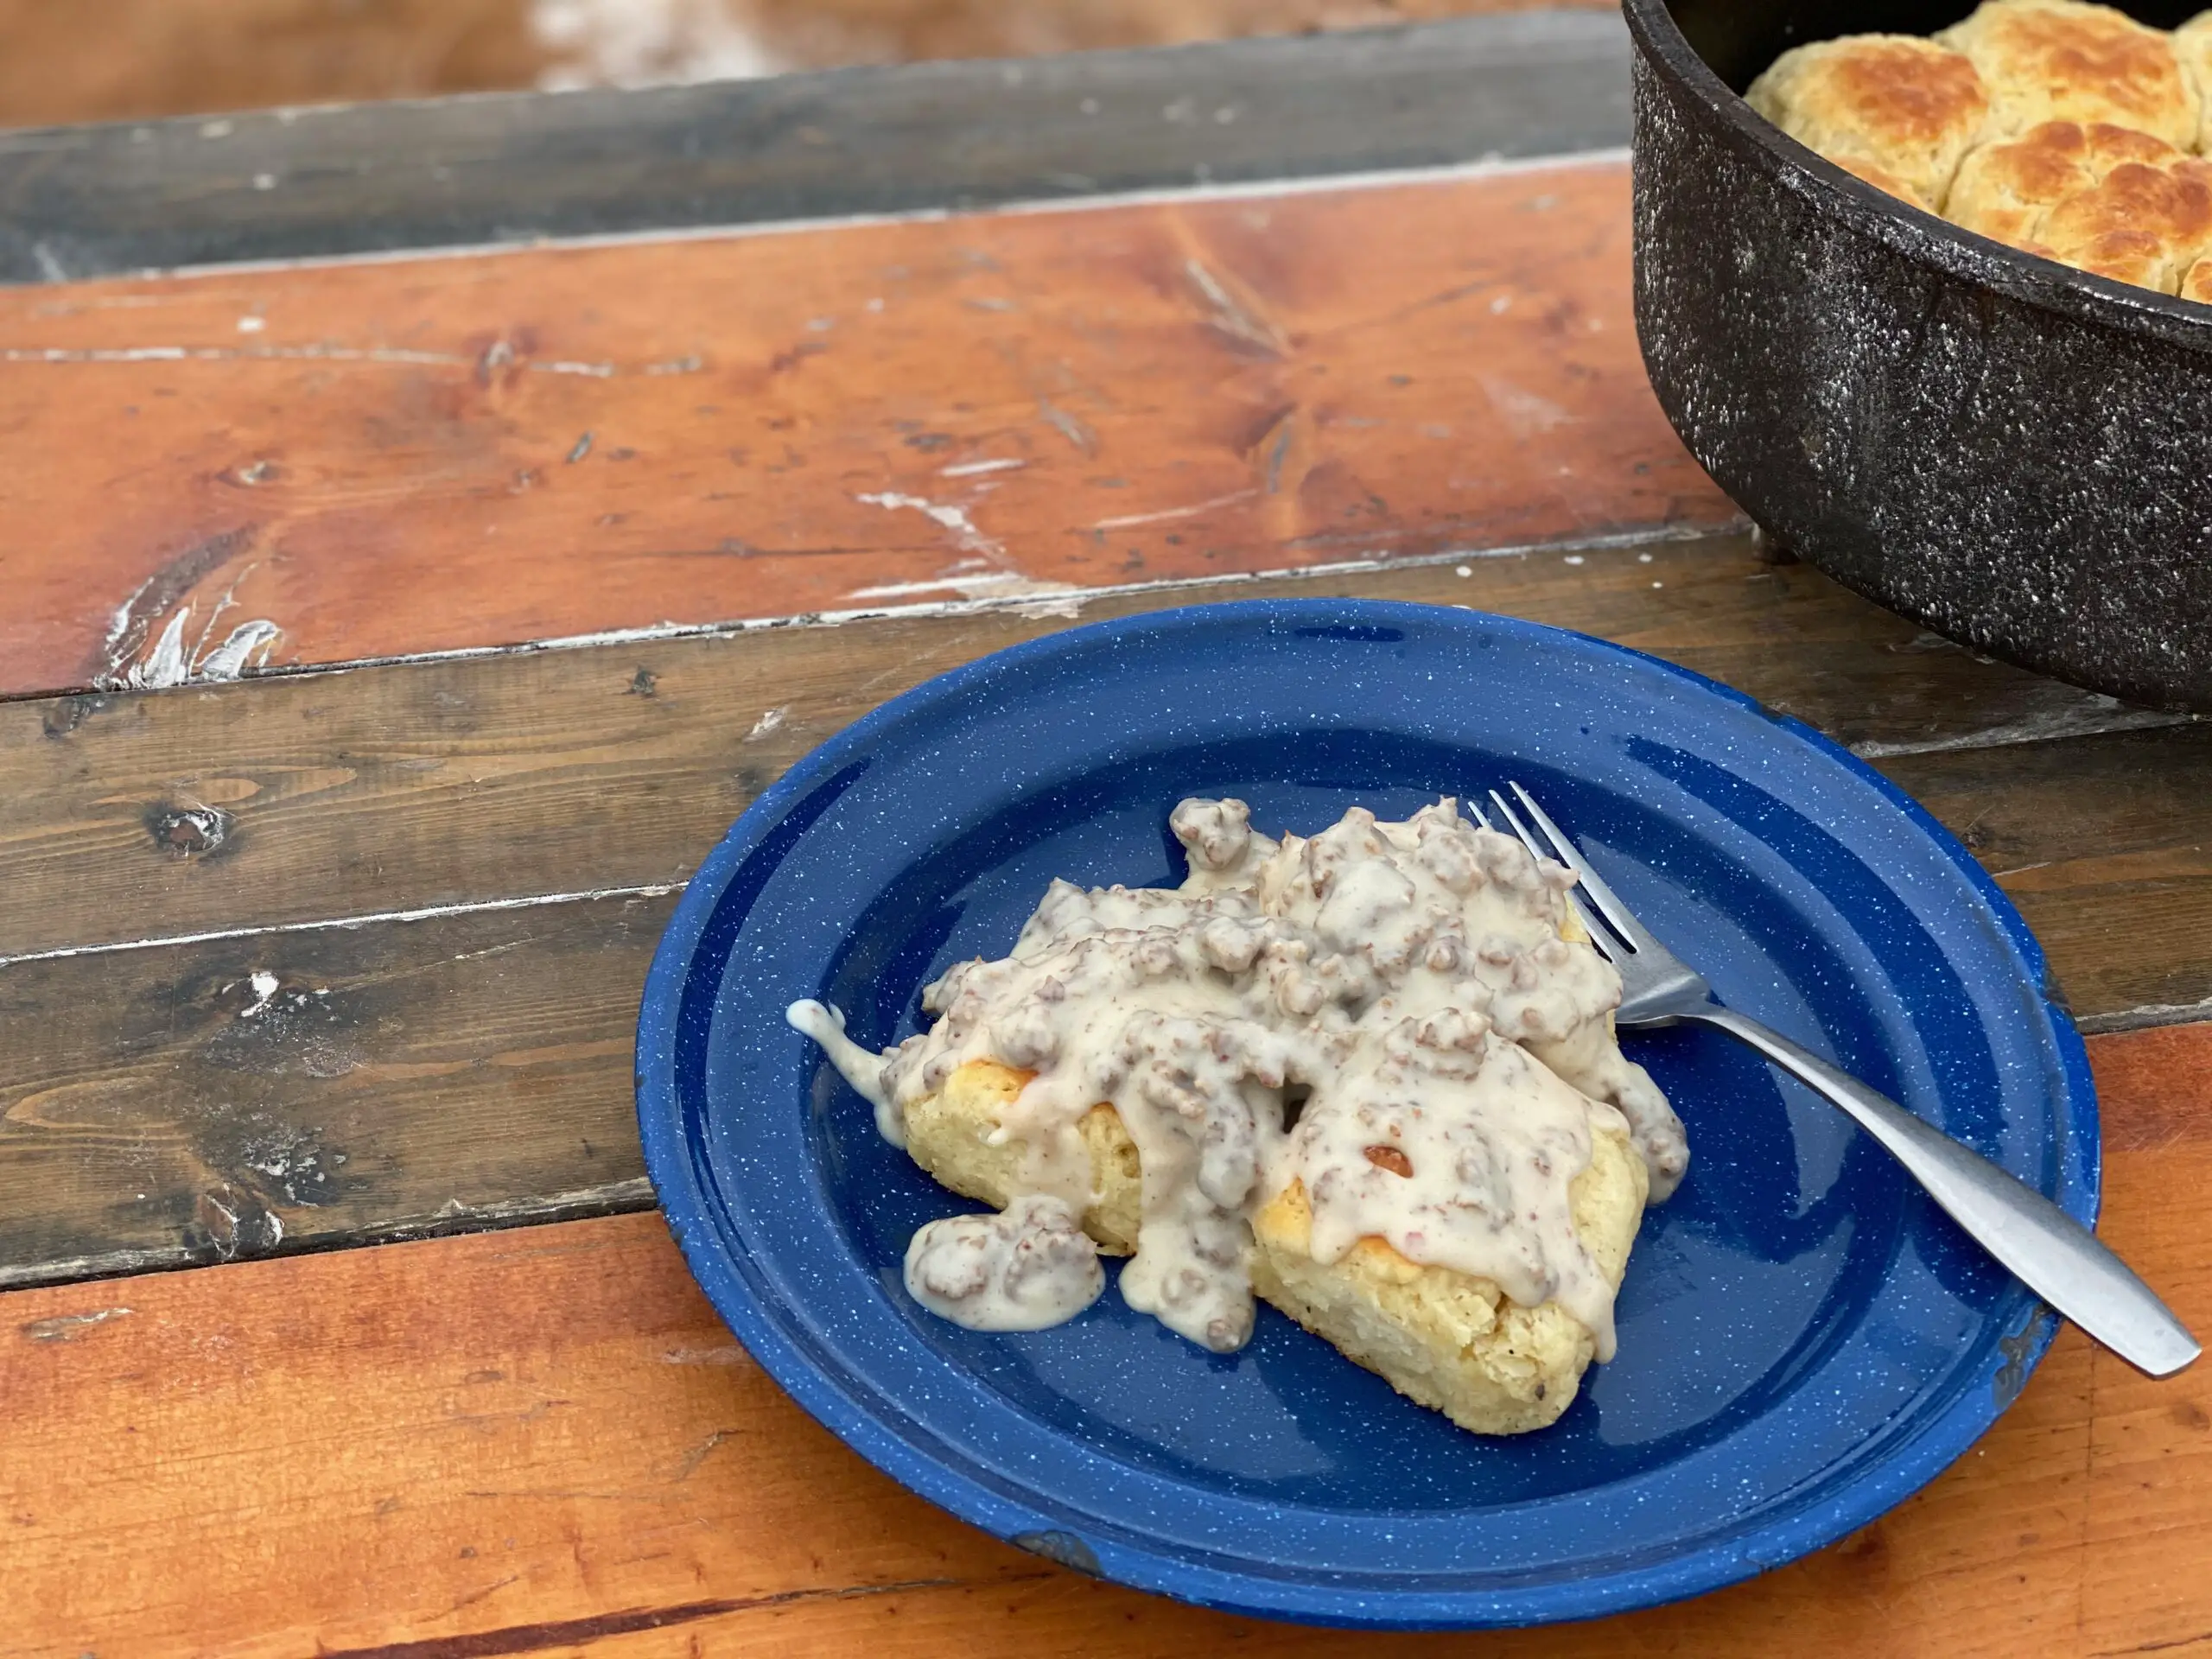 Dutch Oven Camp Cooking Biscuits and Gravy 